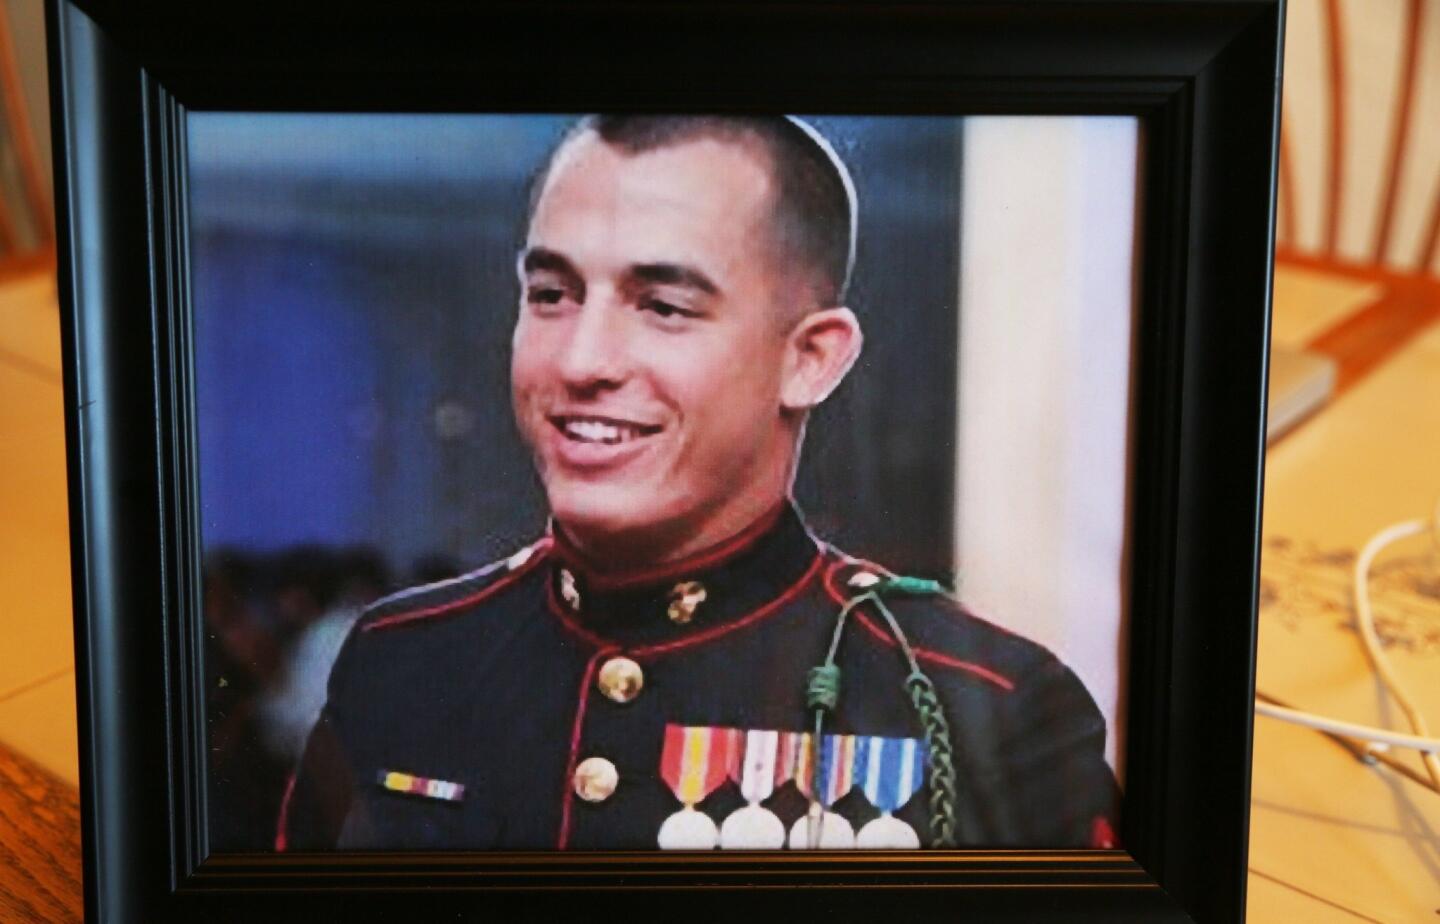 A family photo of Marine Sgt. Andrew Tahmooressi, who was arrested in Mexico after he crossed the border in possession of guns and ammunition.